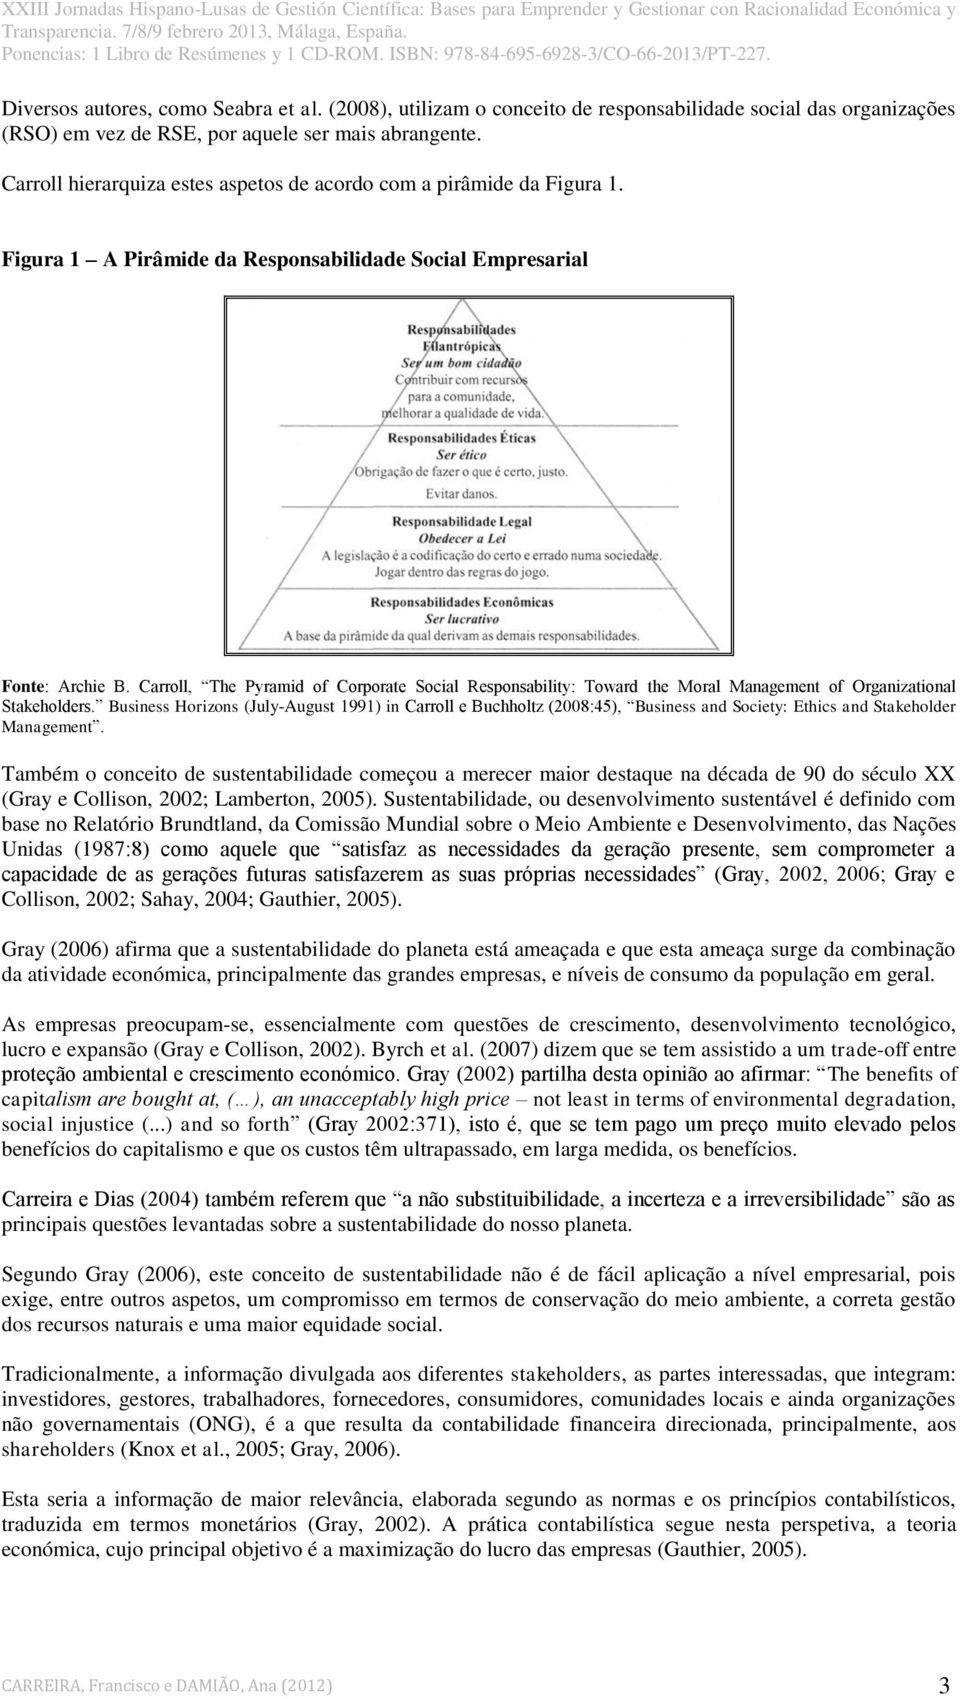 Carroll, The Pyramid of Corporate Social Responsability: Toward the Moral Management of Organizational Stakeholders.